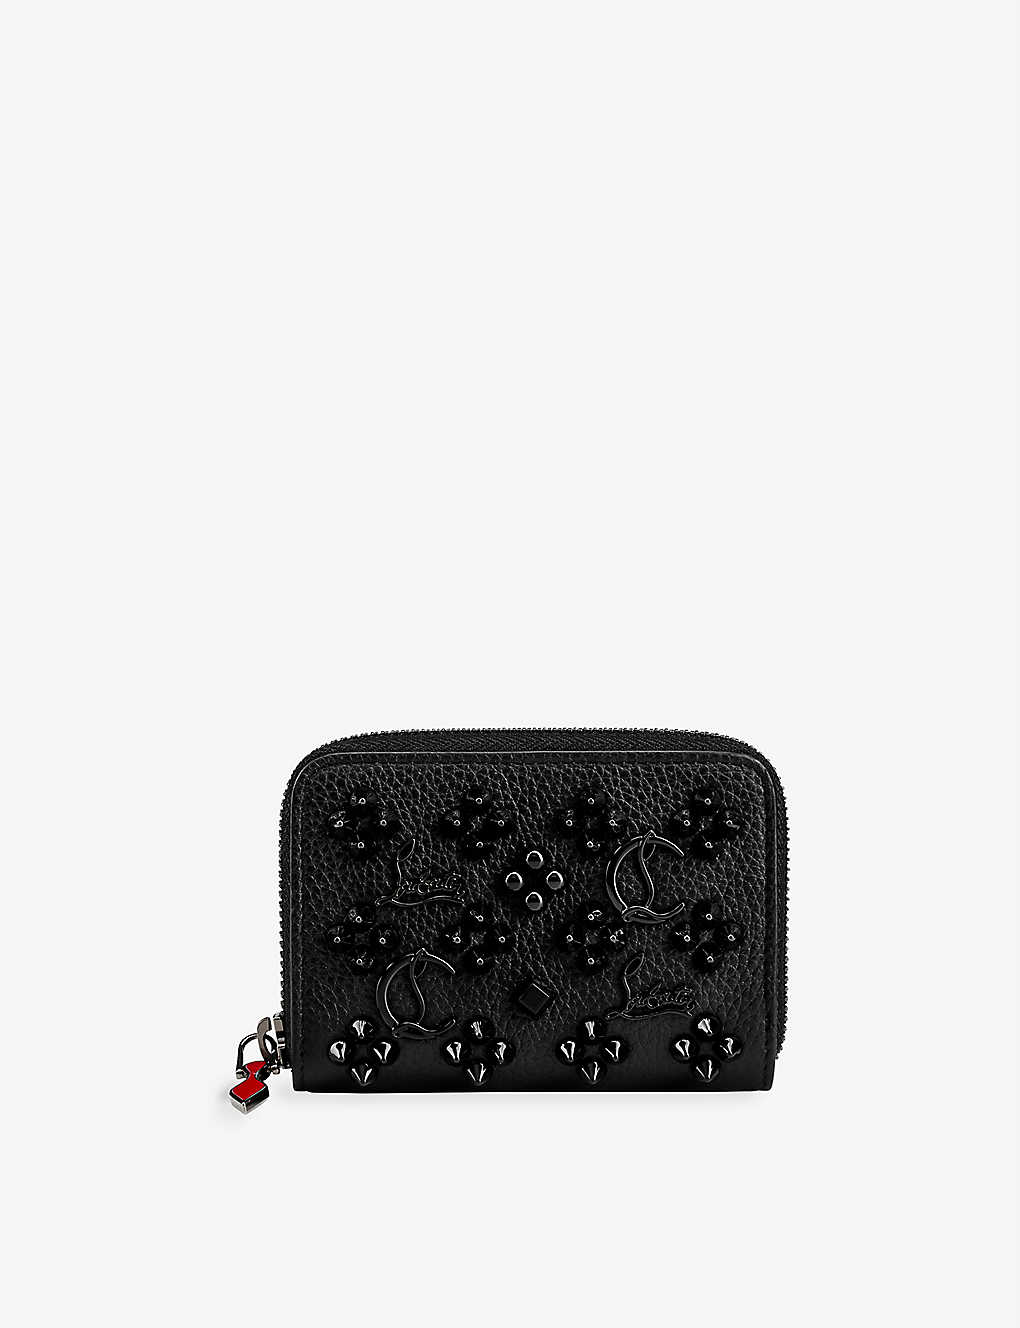 Christian Louboutin Panettone Studded Leather Coin Purse In Black/ultrablack